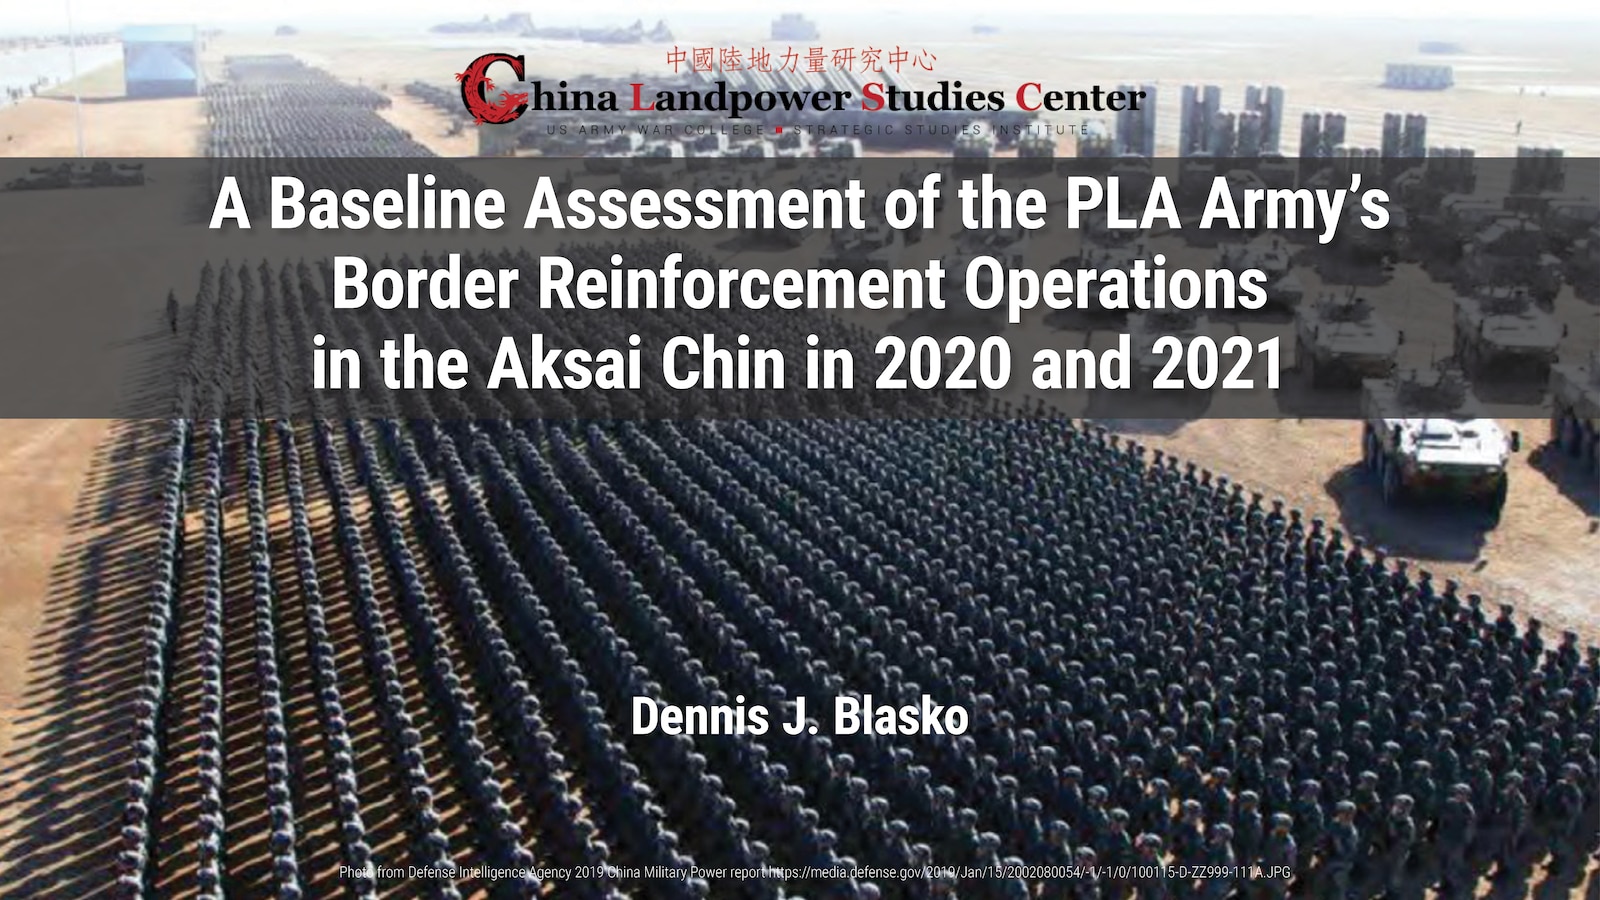 A Baseline Assessment of the PLA Army’s Border Reinforcement Operations in the Aksai Chin in 2020 and 2021 | Dennis J. Blasko